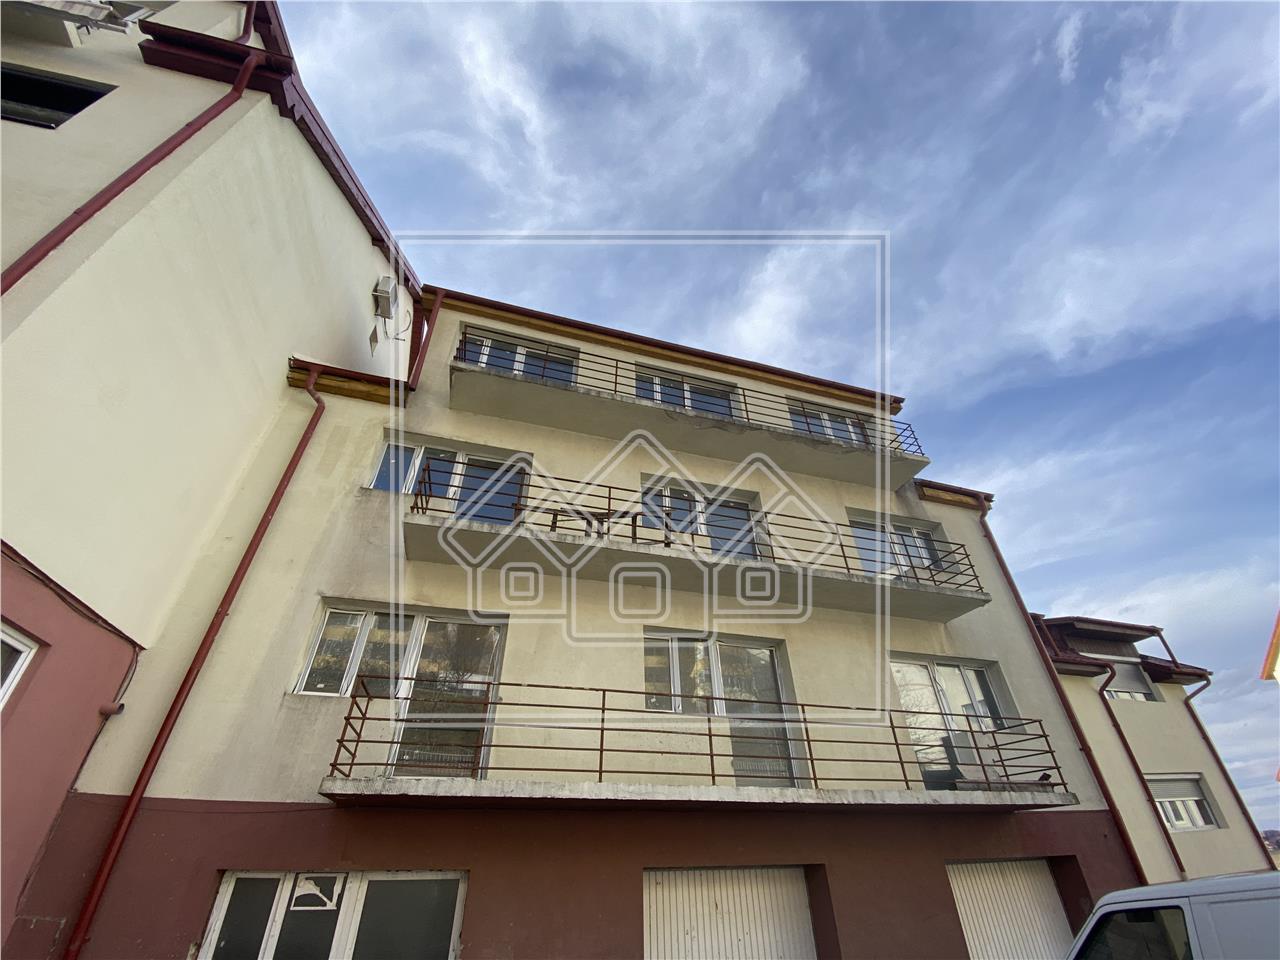 Villa with 3 apartments for sale in Sibiu - garage / apartment -